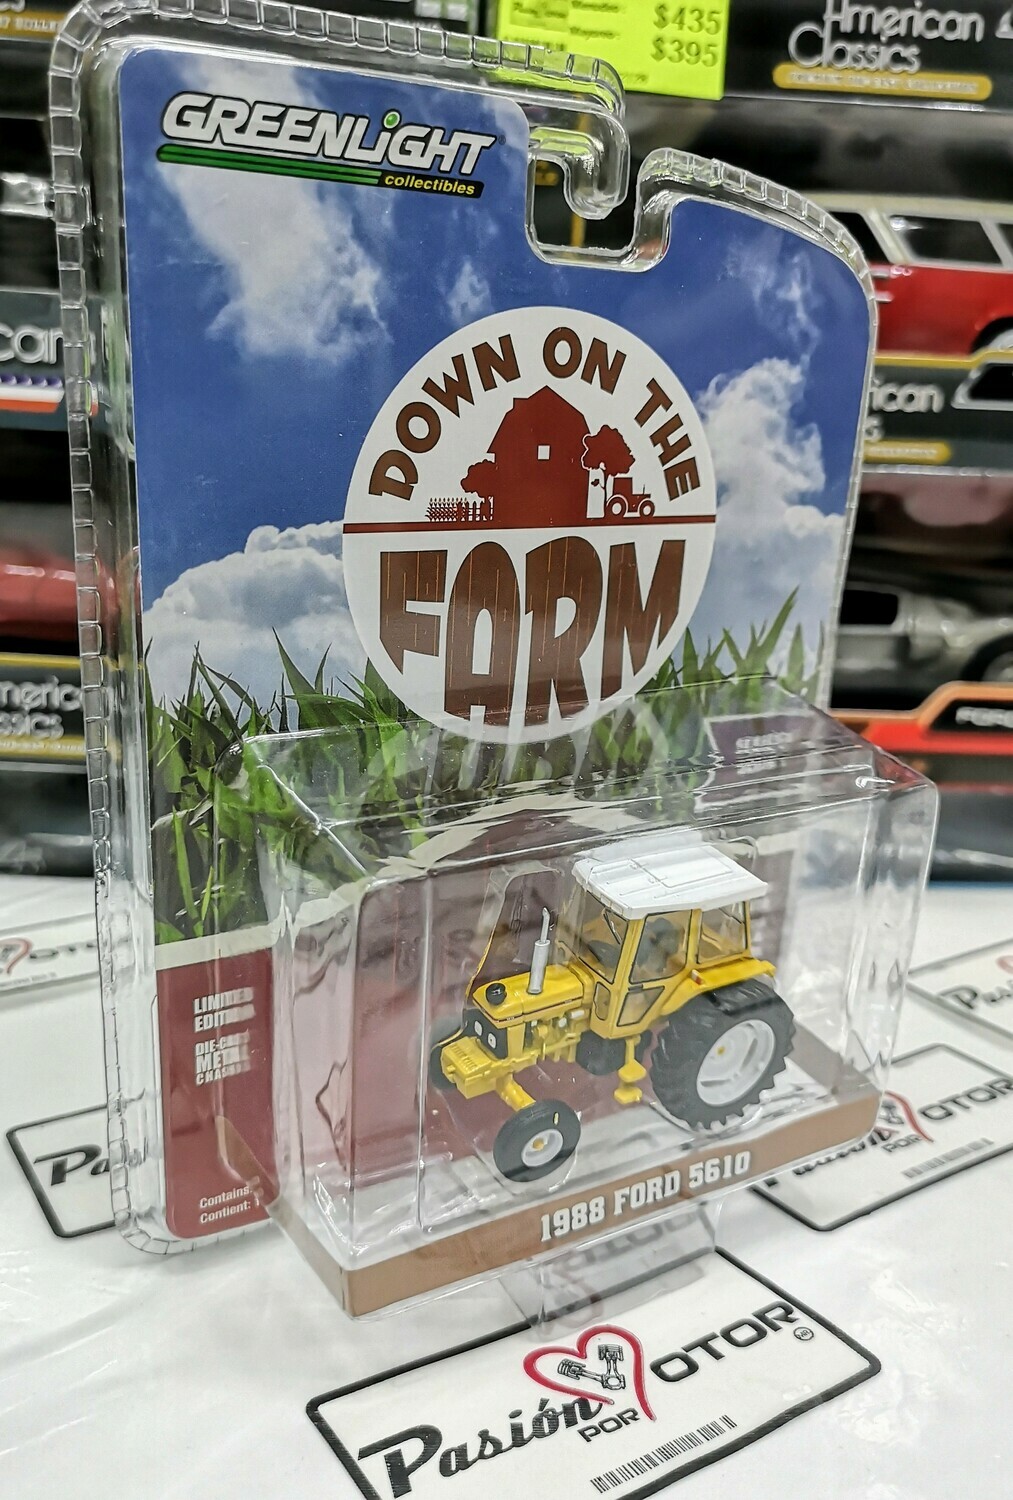 1:64 Ford 5610 1988 Amarillo Tractor Agricola Greenlight Down On The Farm Serie 1